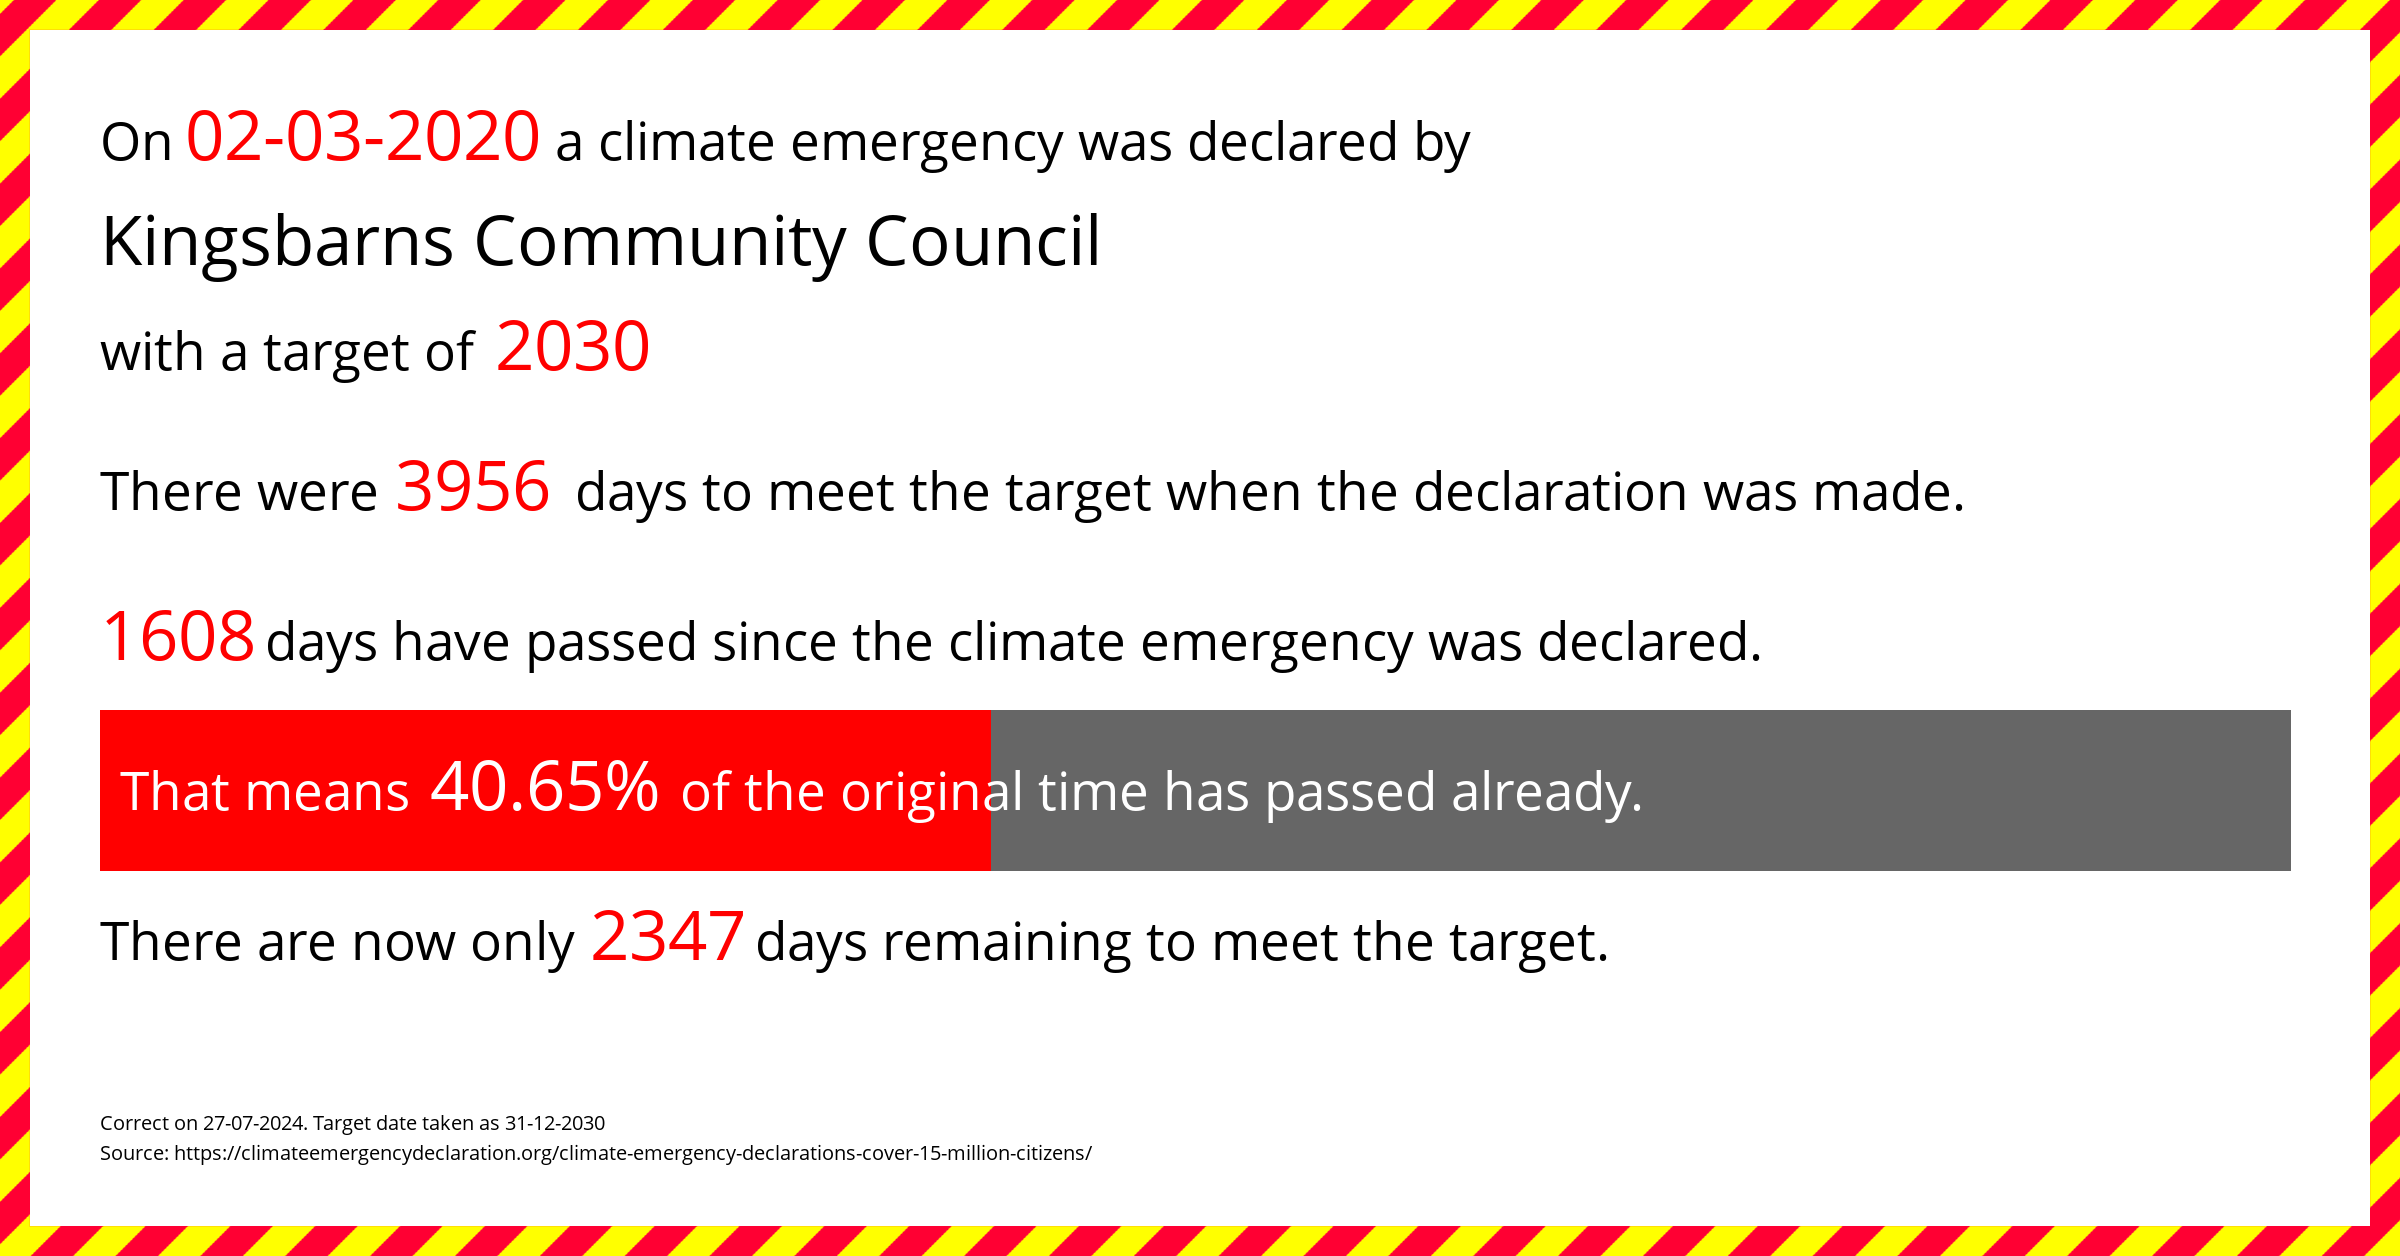 Kingsbarns Community Council declared a Climate emergency on Monday 2nd March 2020, with a target of 2030.